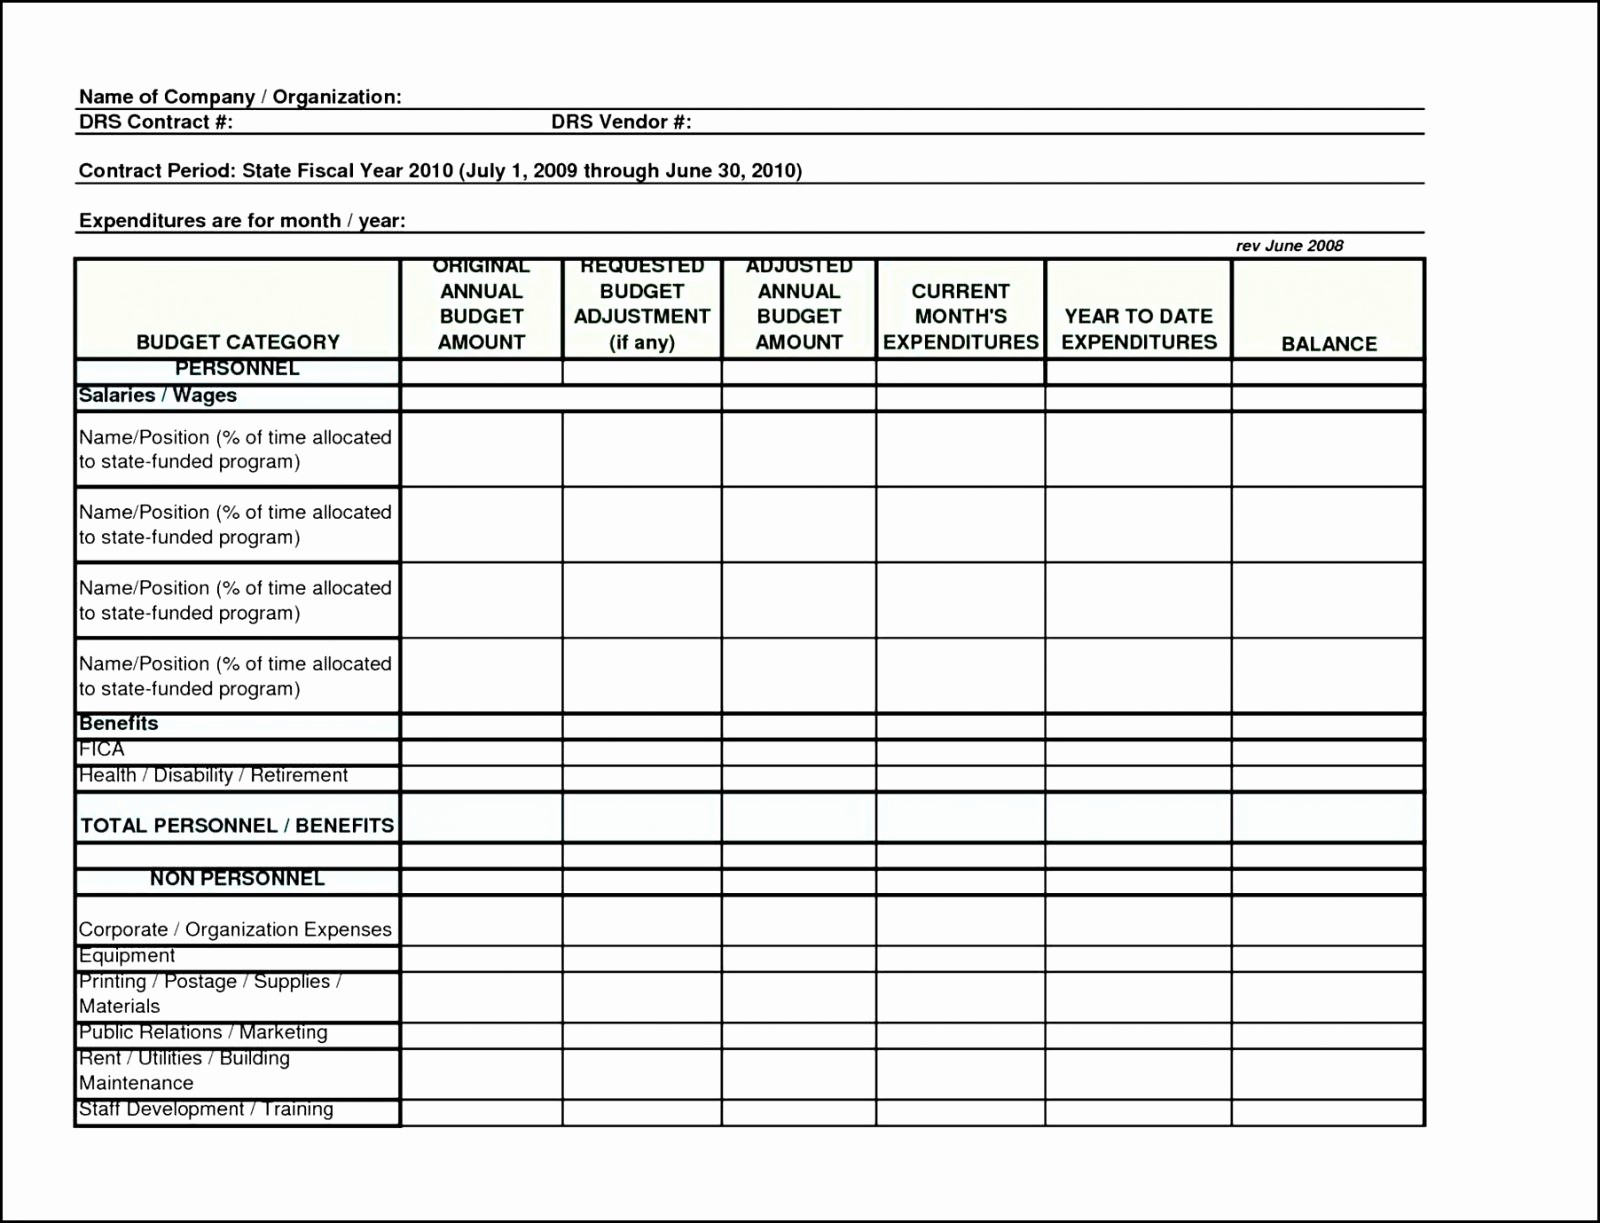 Blank Cma Spreadsheet Best Of Free Examples Real Document